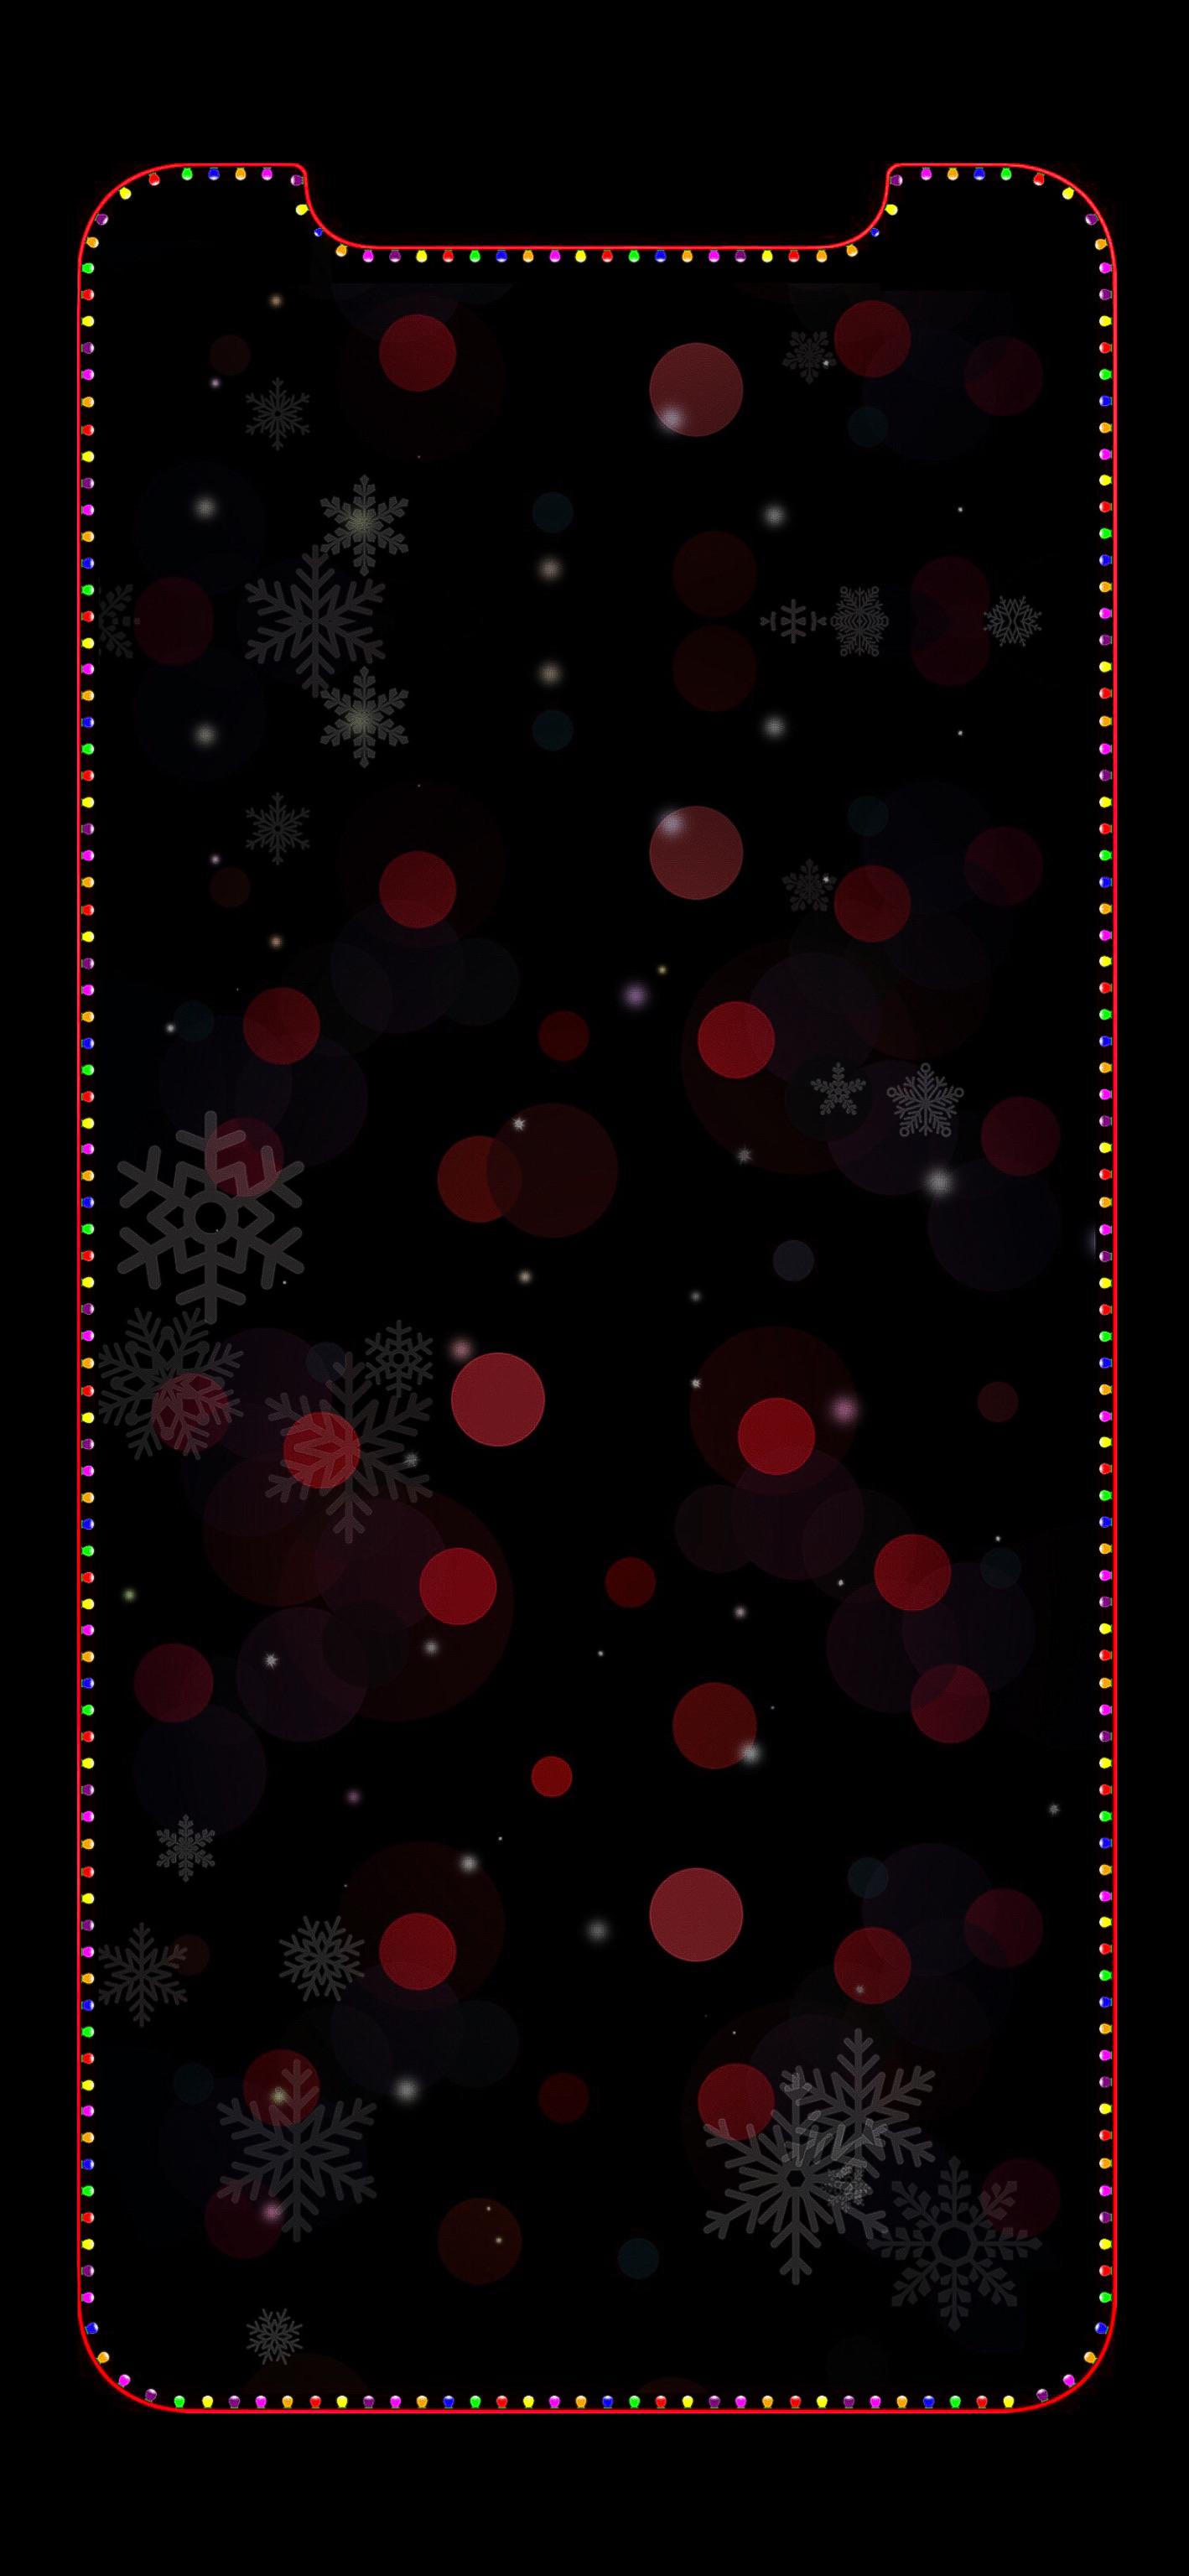 Great Christmas wallpaper (link in comments): iphonewallpaper